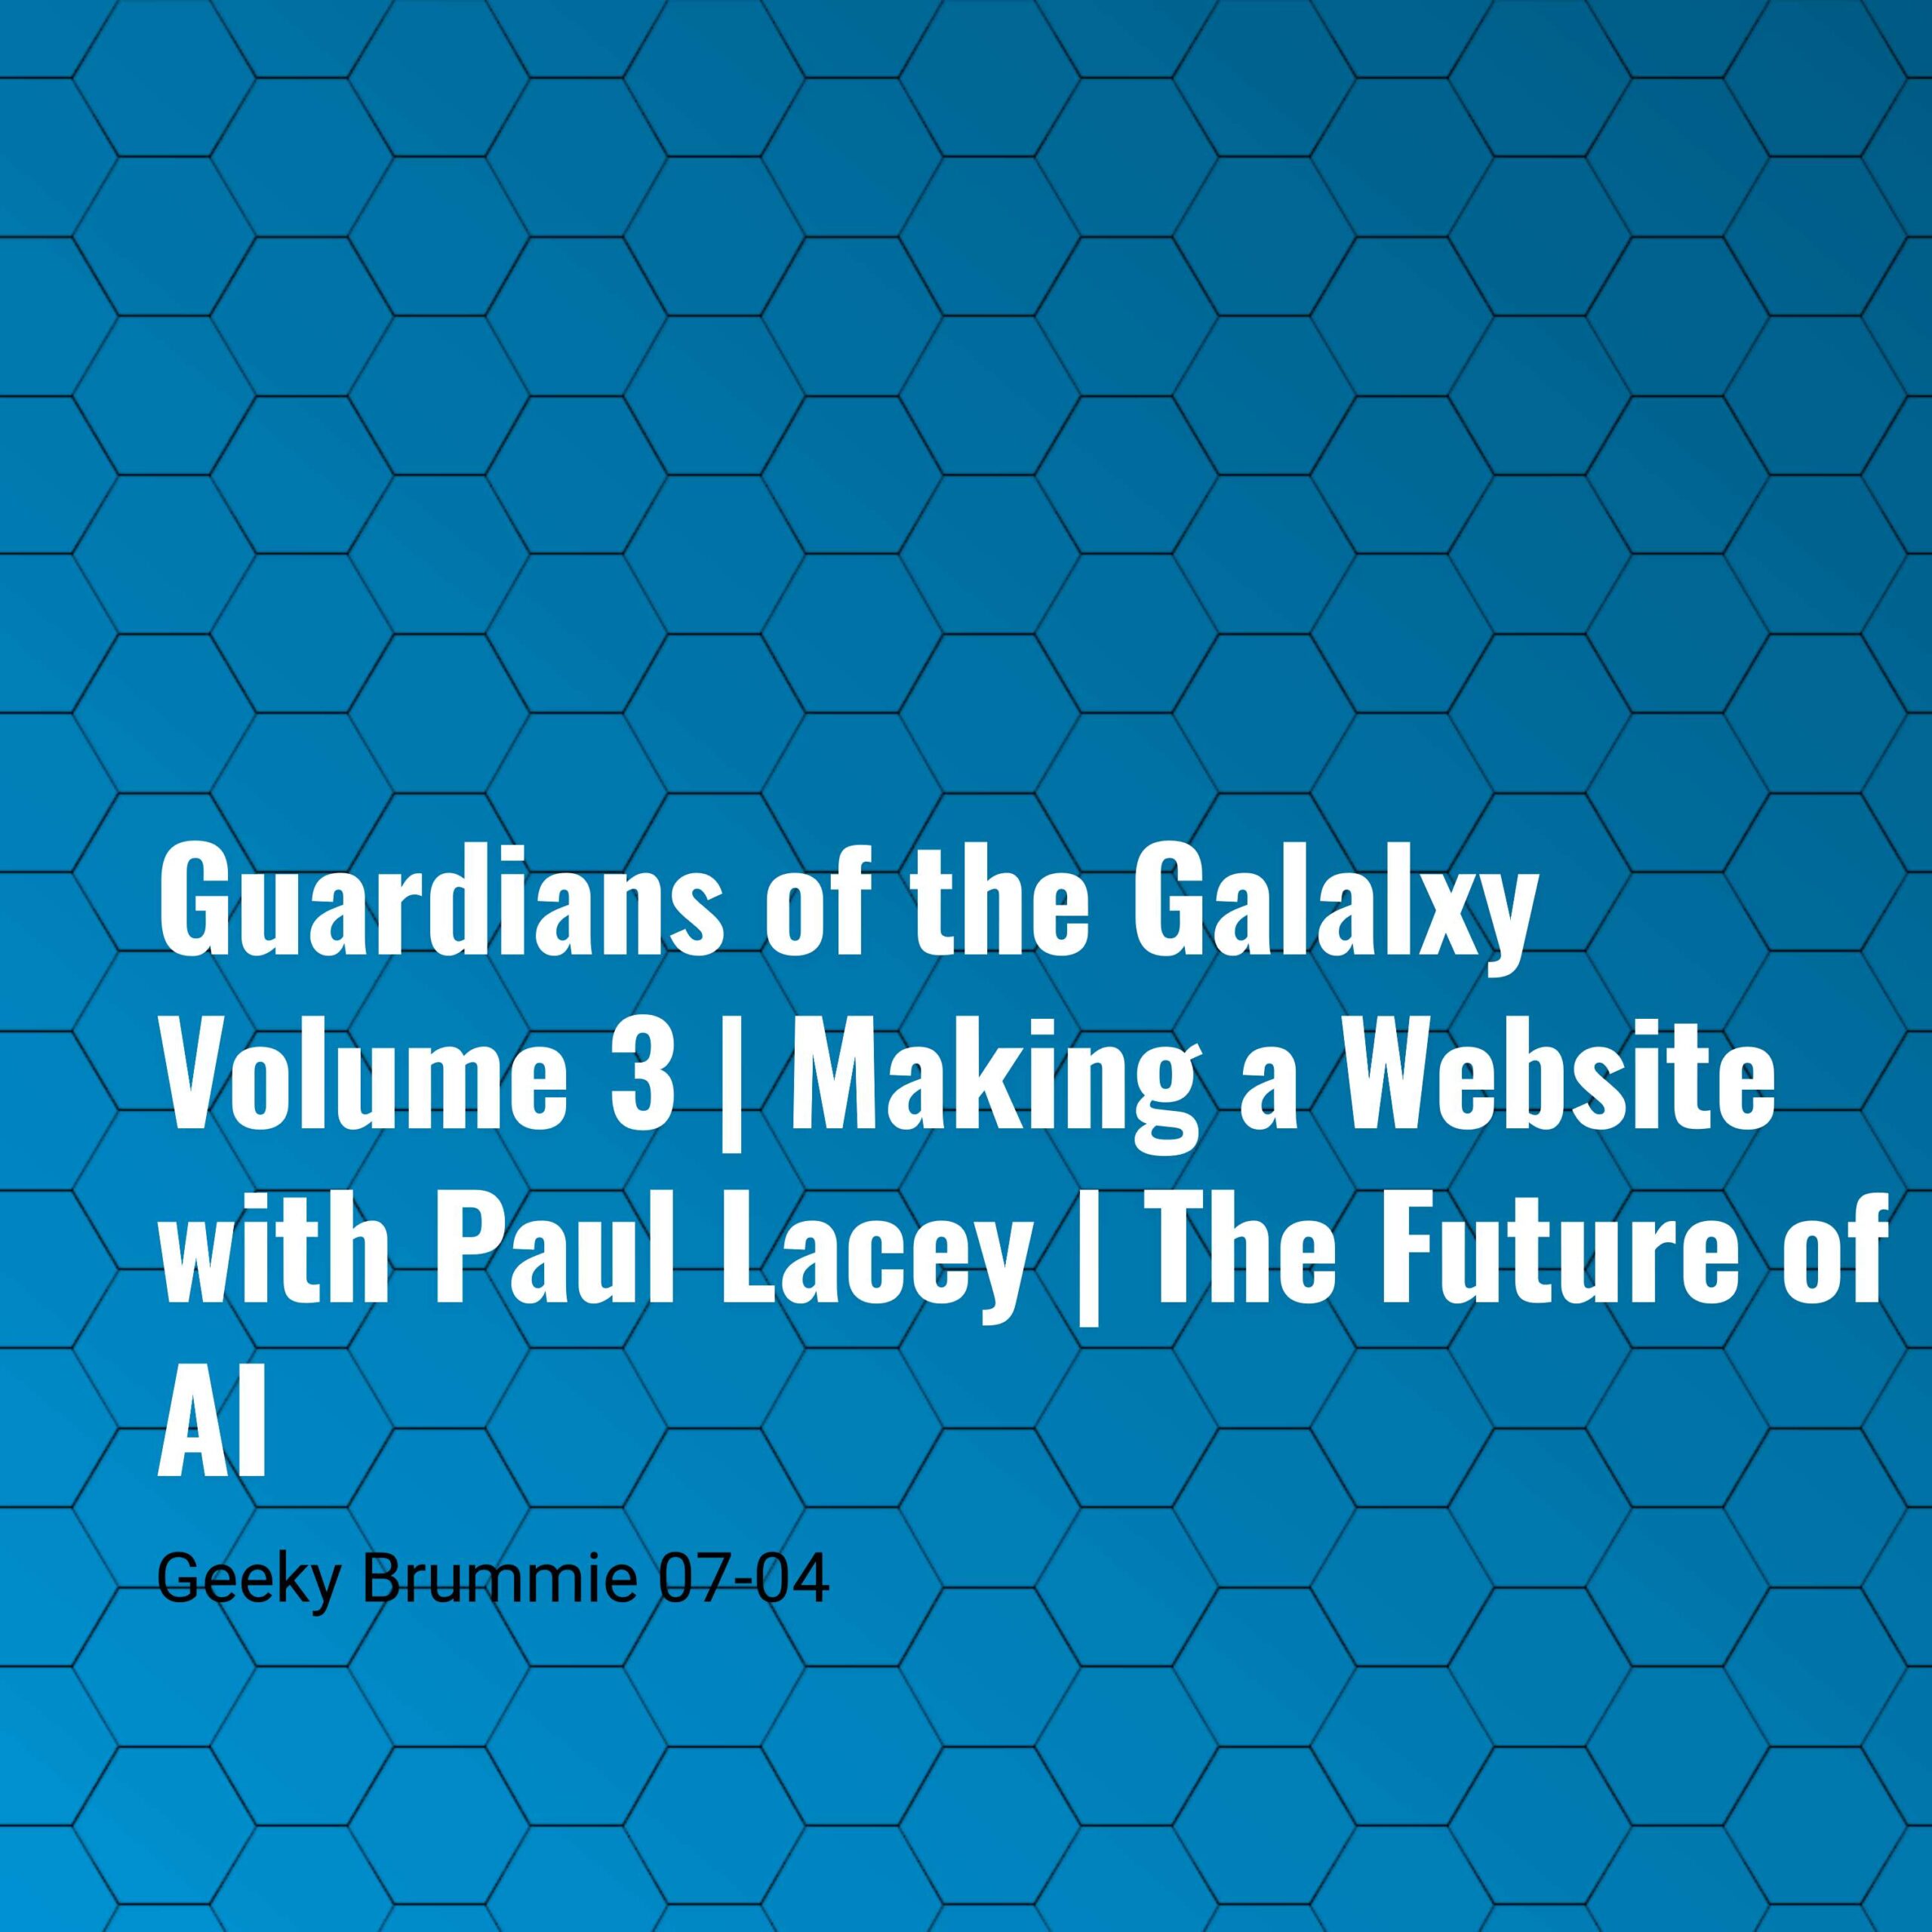 Guardians of the Galaxy Volume 3 | Making a Website with Paul Lacey | The Future of AI